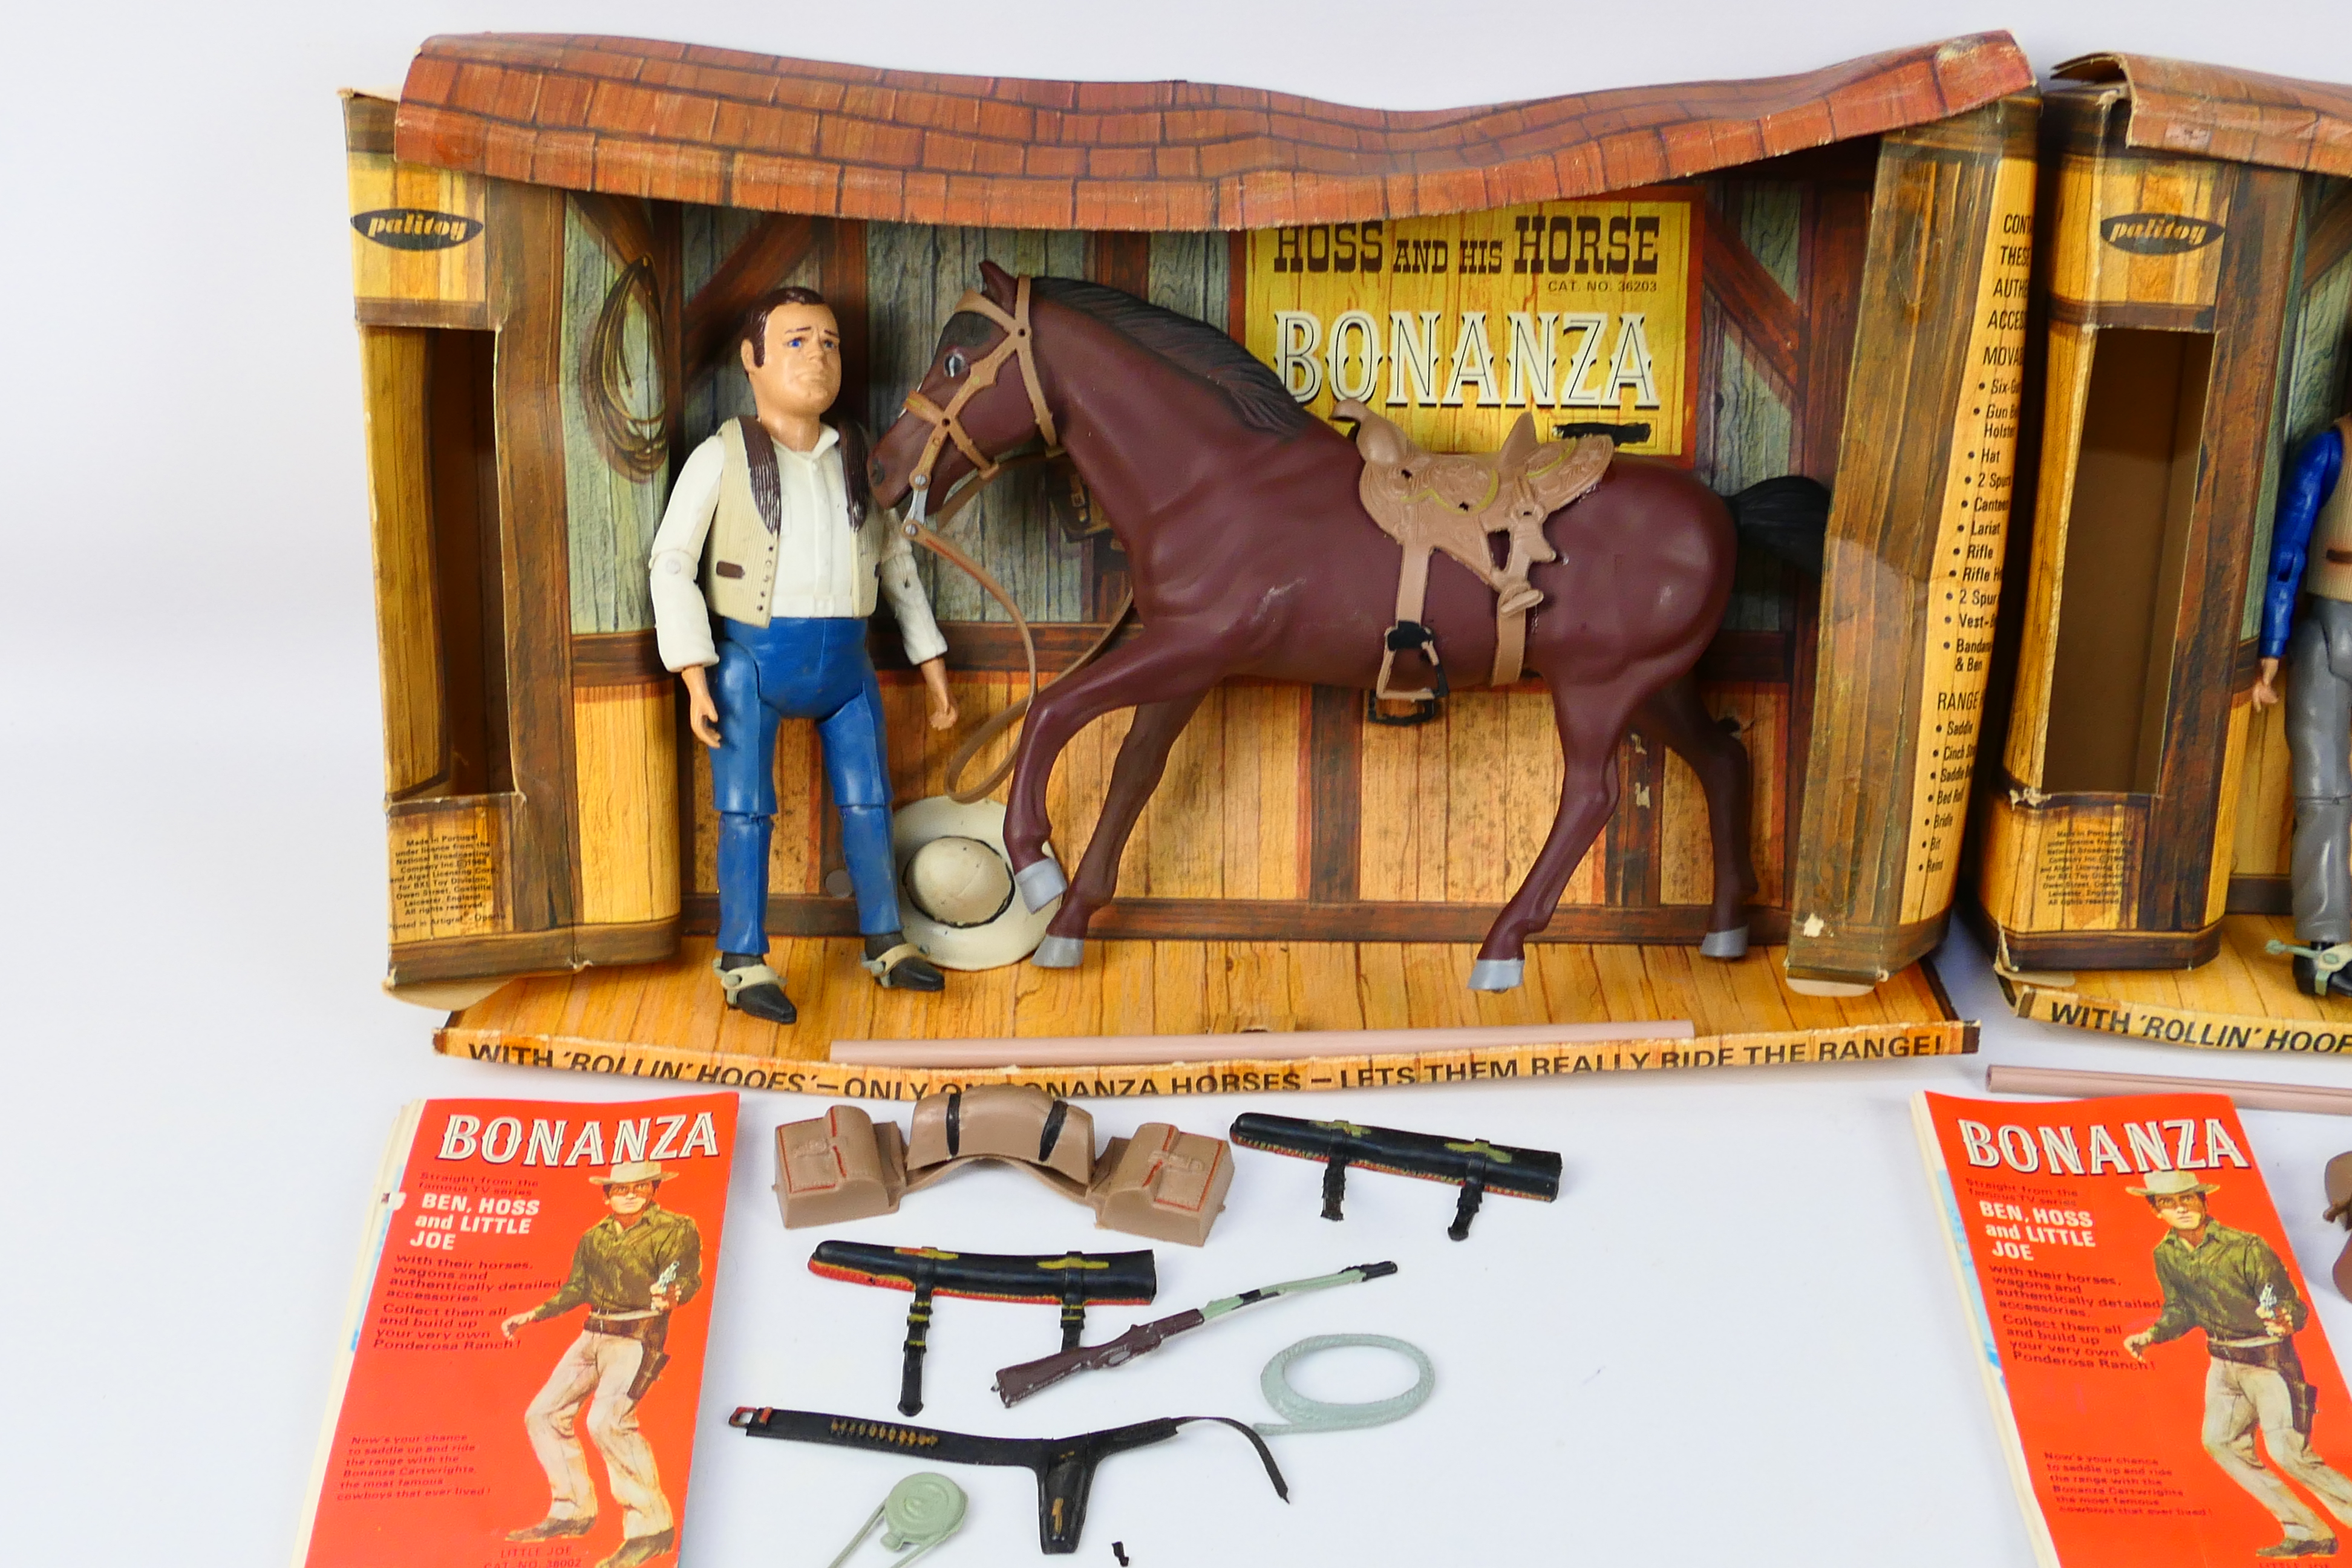 Palitoy - Bonanza - 2 x boxed sets, Ben And His Horse # 36201 and Hoss And His Horse # 36203. - Image 2 of 14